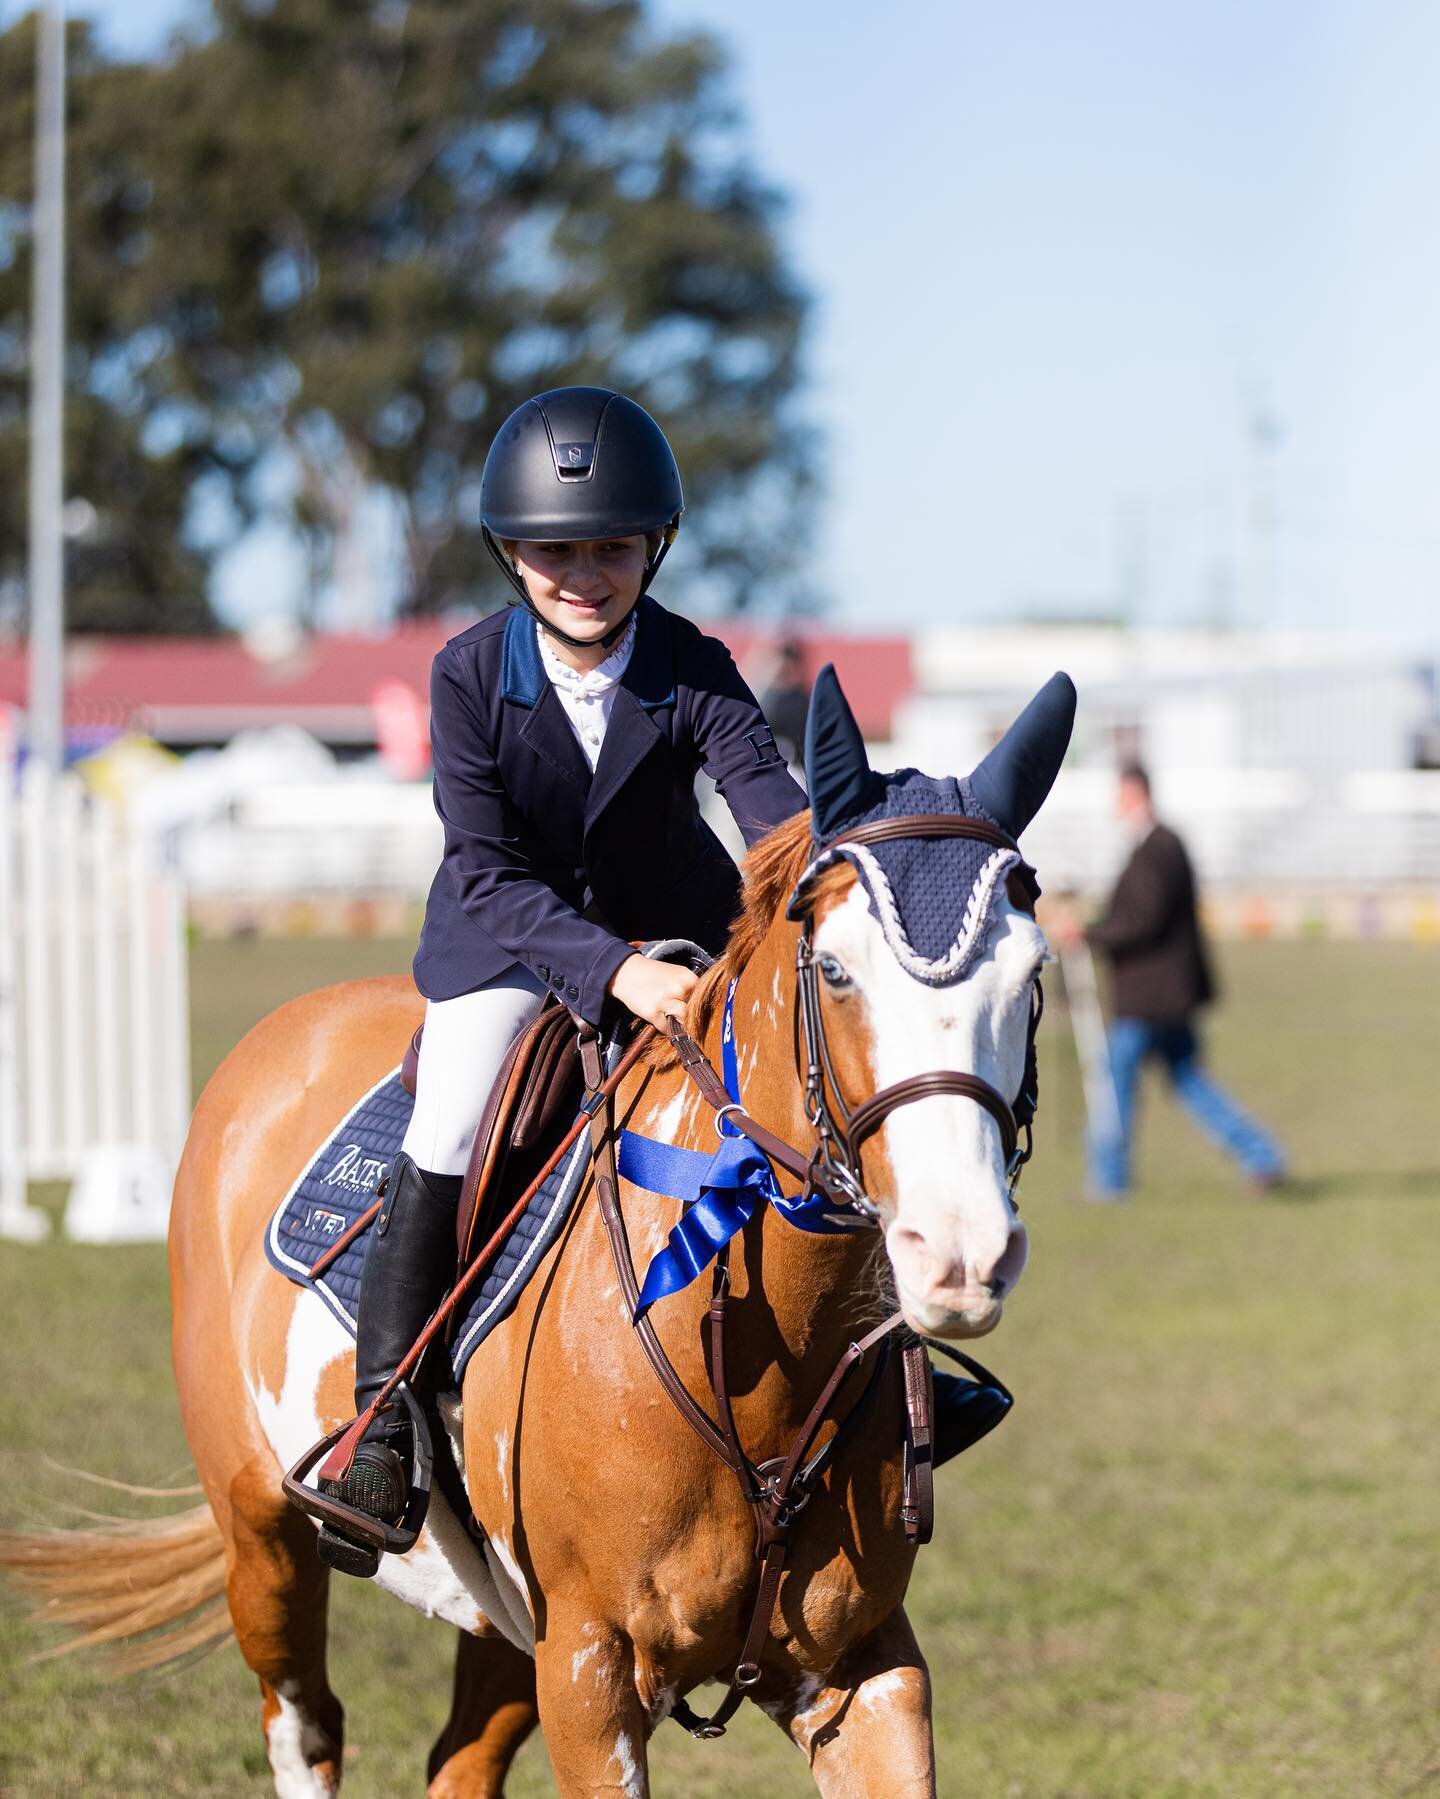 Not long now until I&rsquo;ll be representing QLD at the Interschool National Championships! At the end of this month myself and Cowboy will travel down to Sydney to compete against Australia&rsquo;s best young riders 🏆 #RangeviewRider

📸 @thejtaim